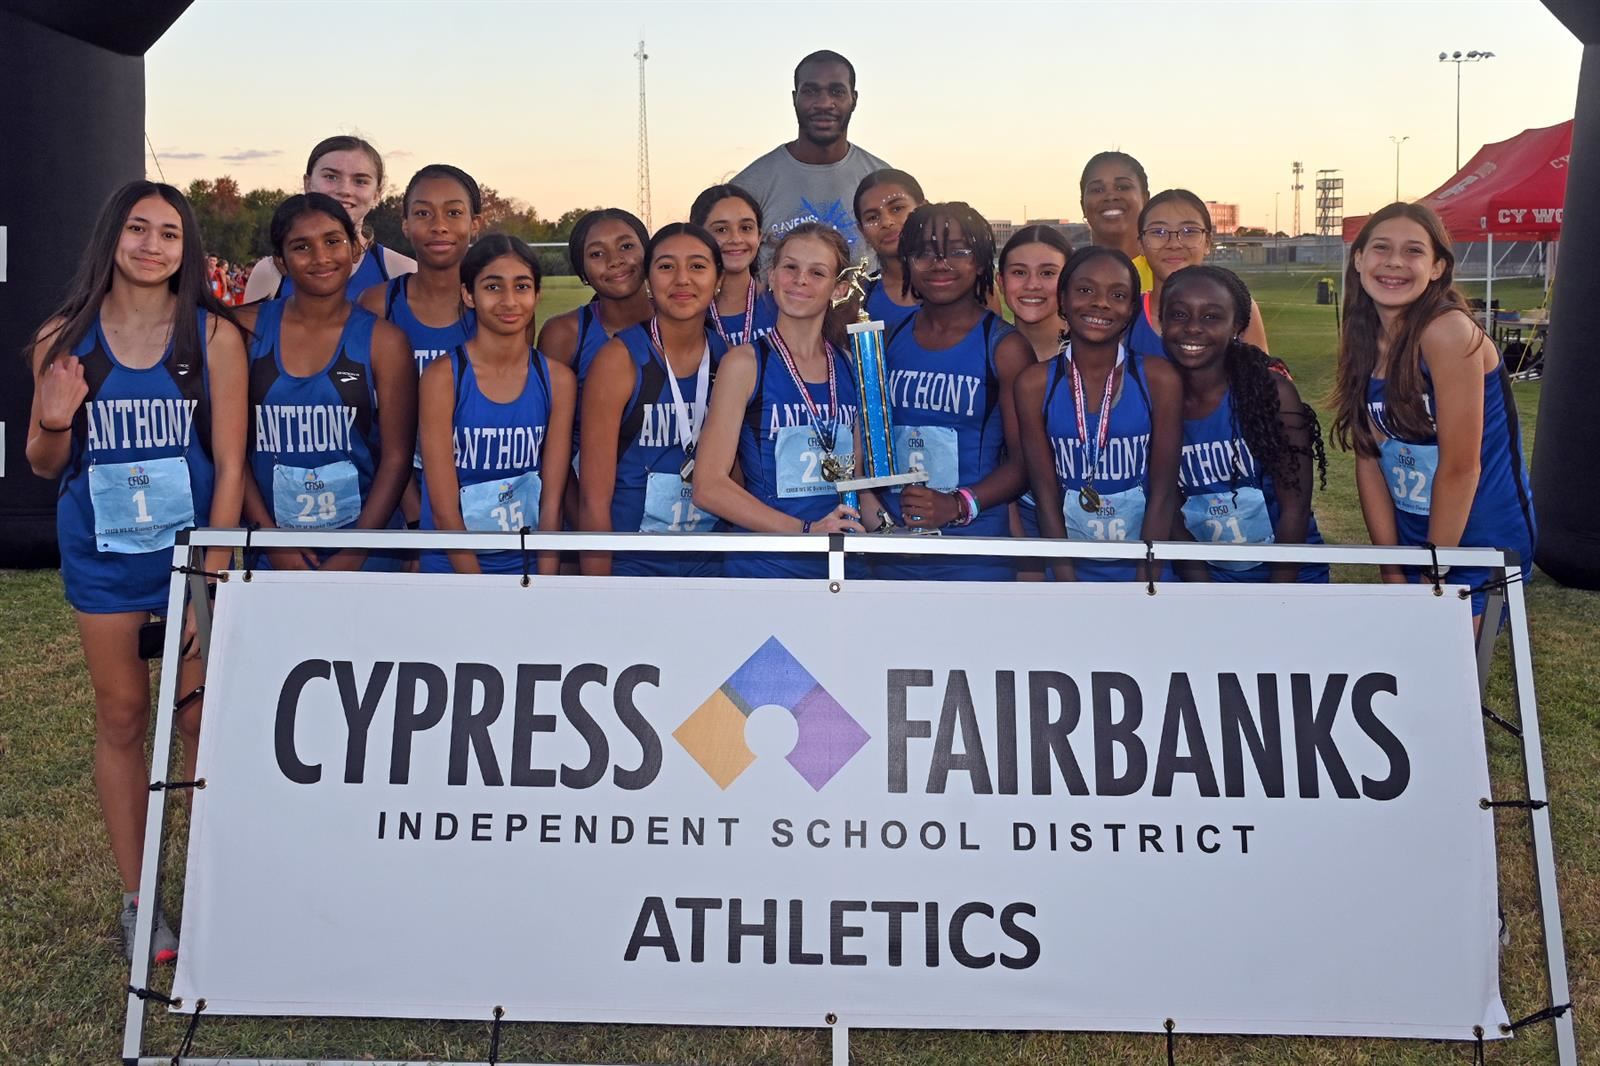 Anthony Middle School won the eighth grade girls’ cross country team championship with a score of 65 points on Oct. 18.